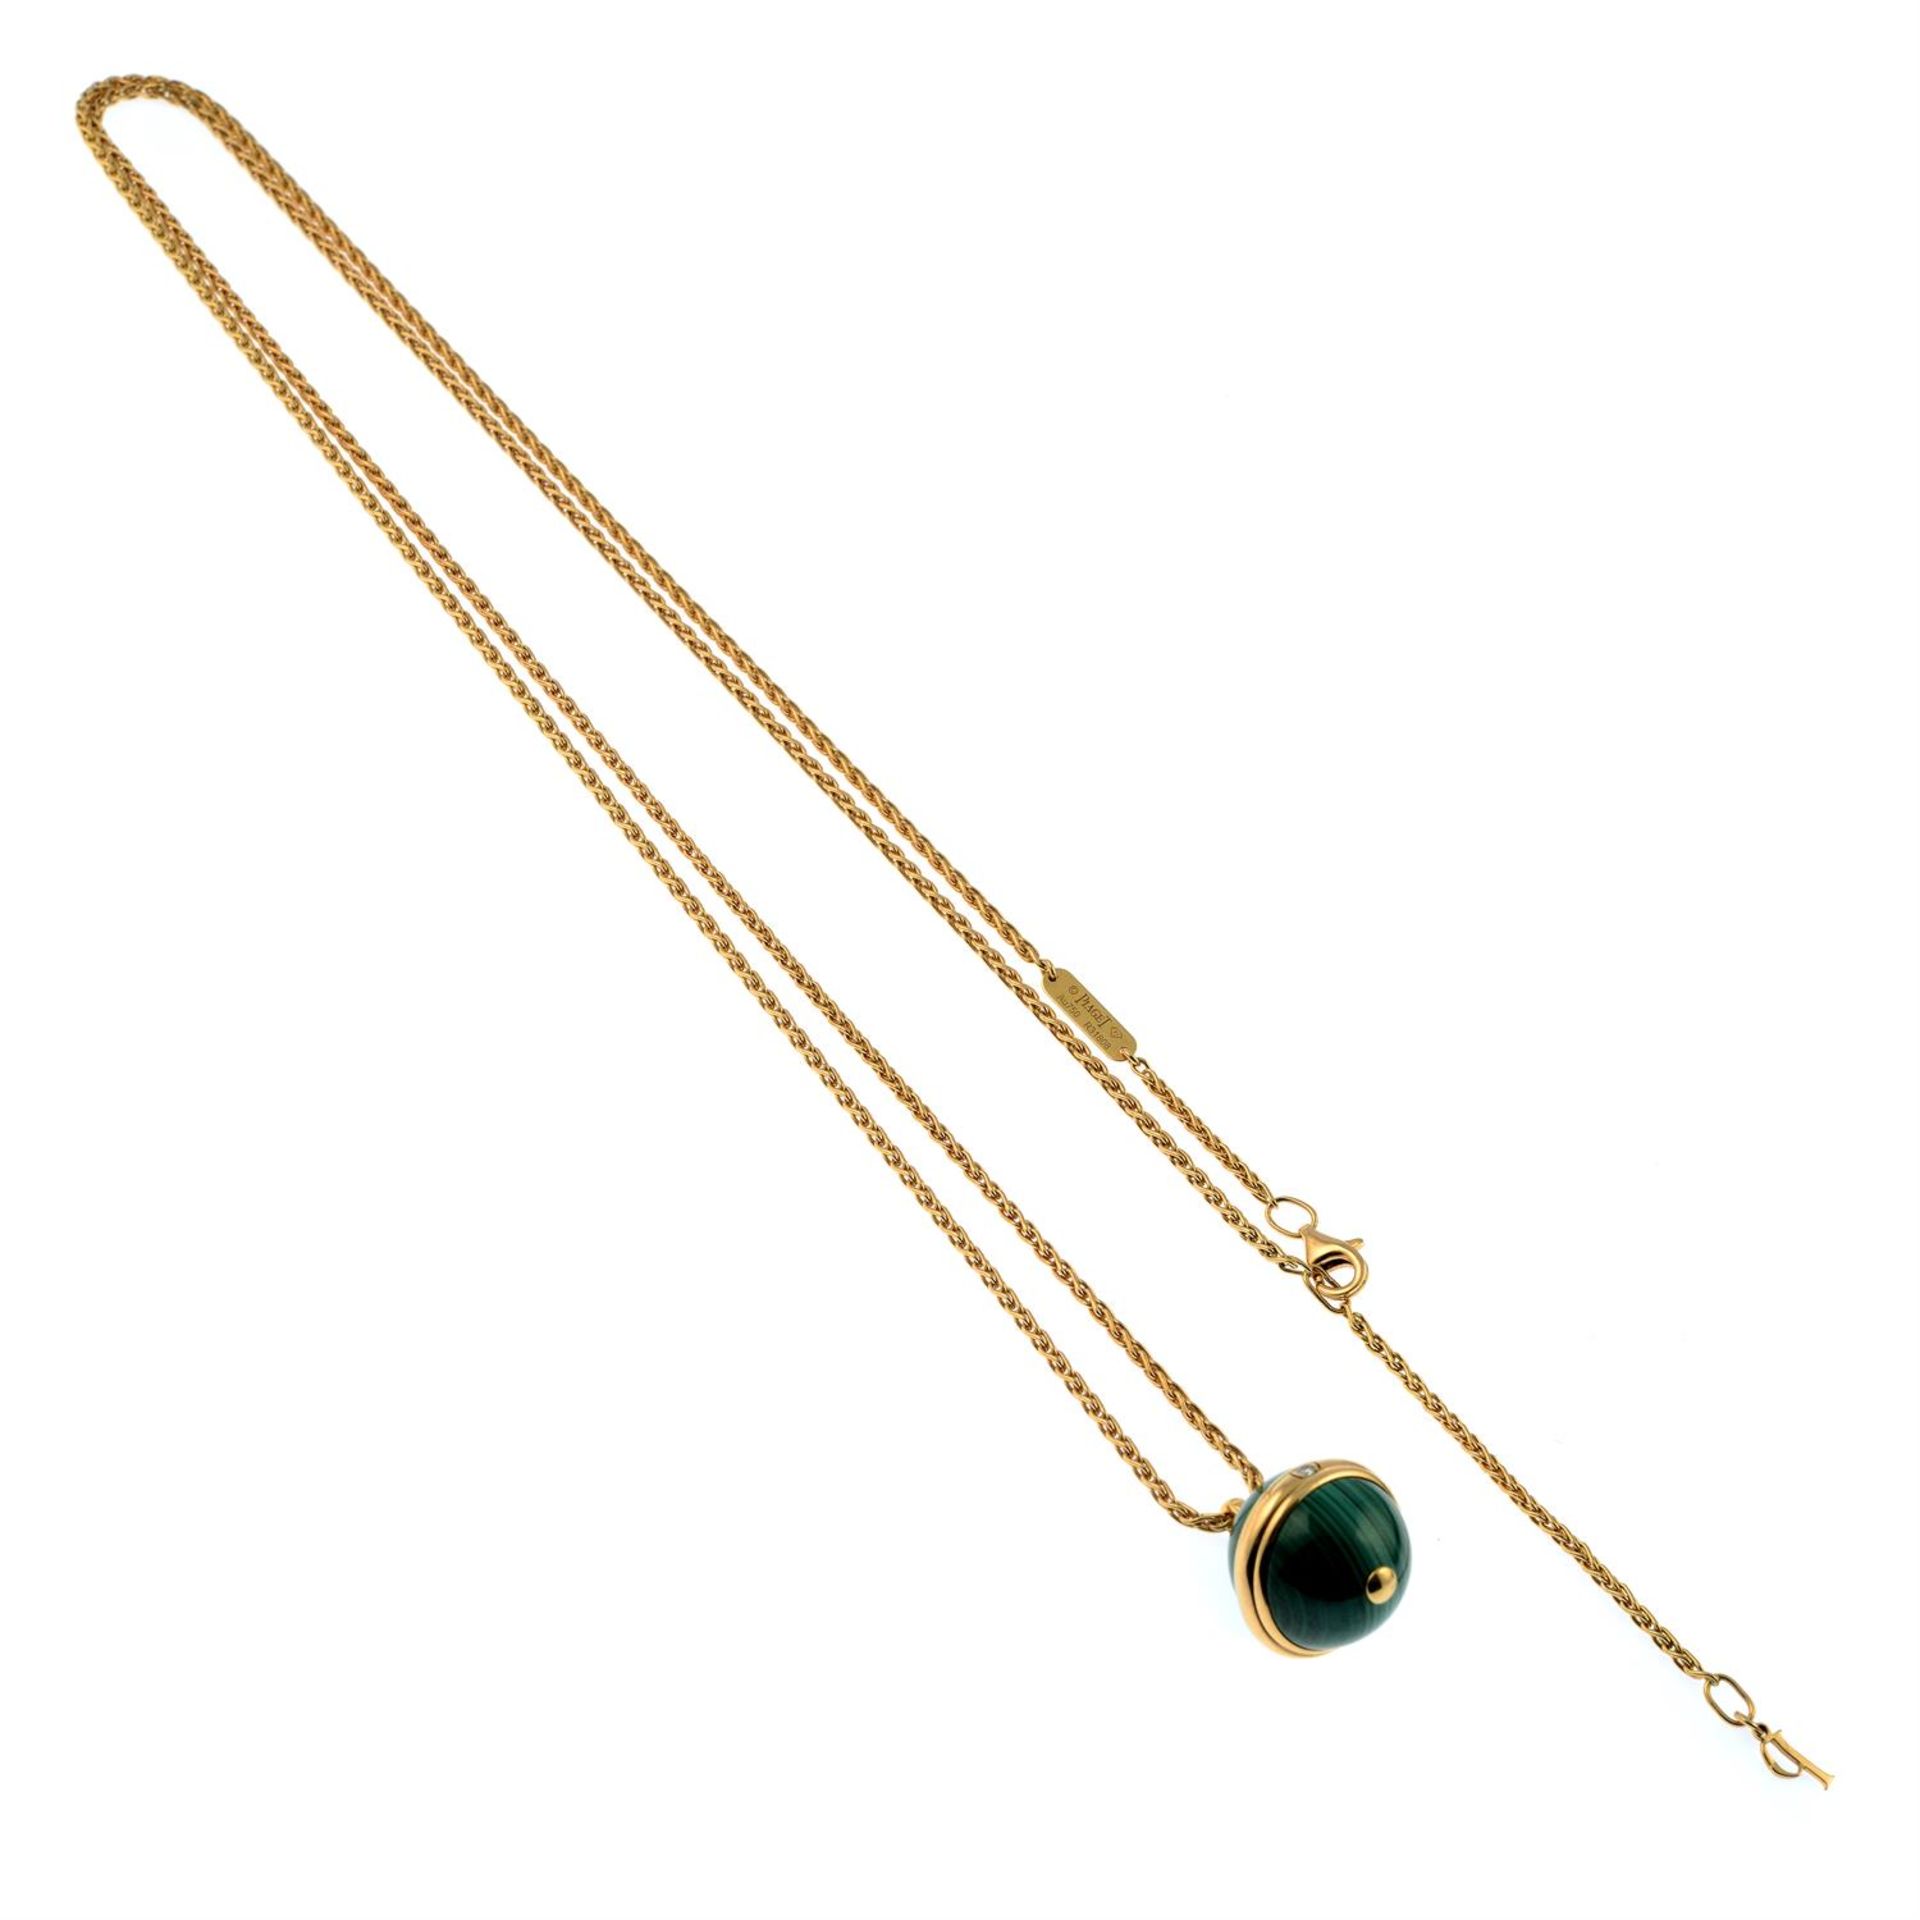 A malachite and diamond 'Posession' pendant, on chain, by Piaget. - Image 4 of 6